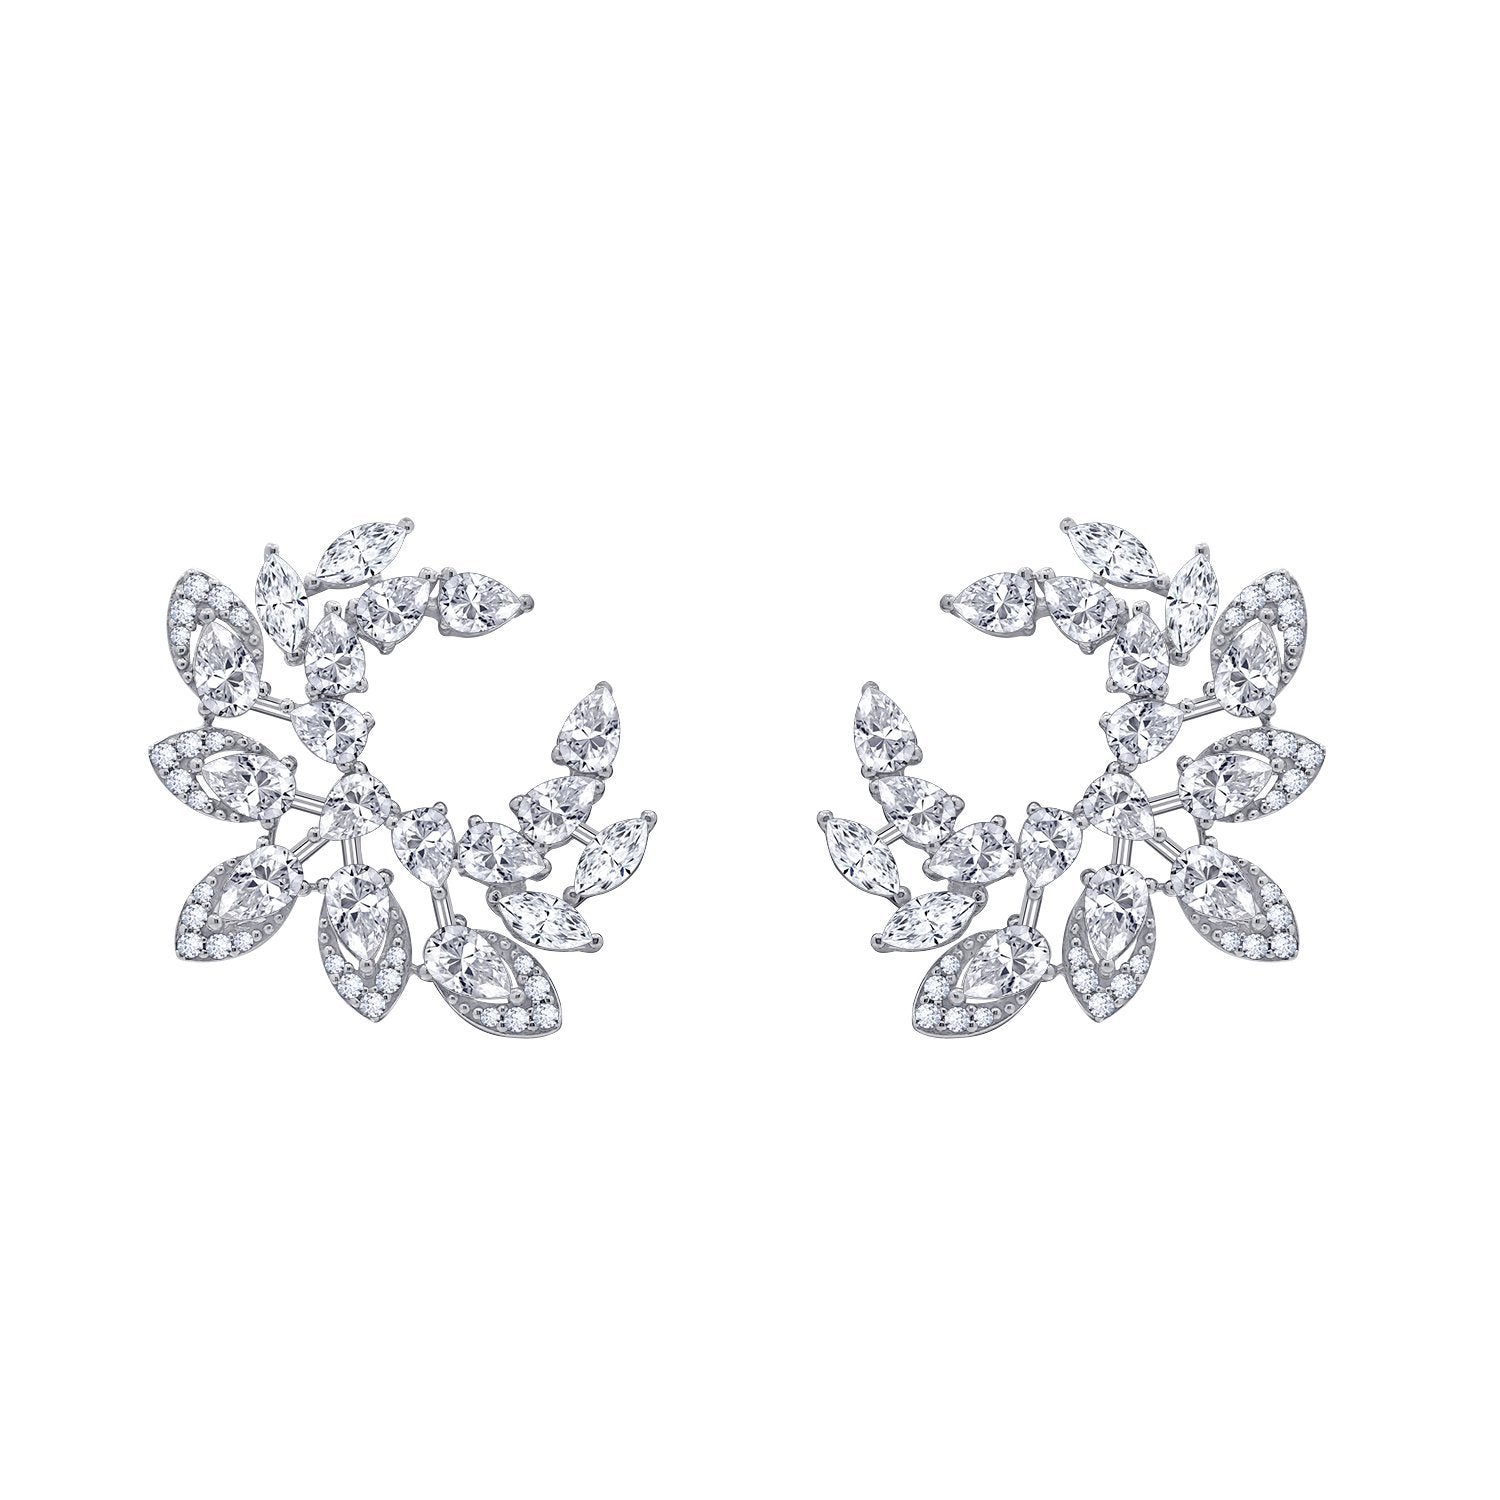 KIERA COUTURE Platinum Clad Sterling Silver Floral 6.38 cttw Cubic Zirconia Statement Earrings